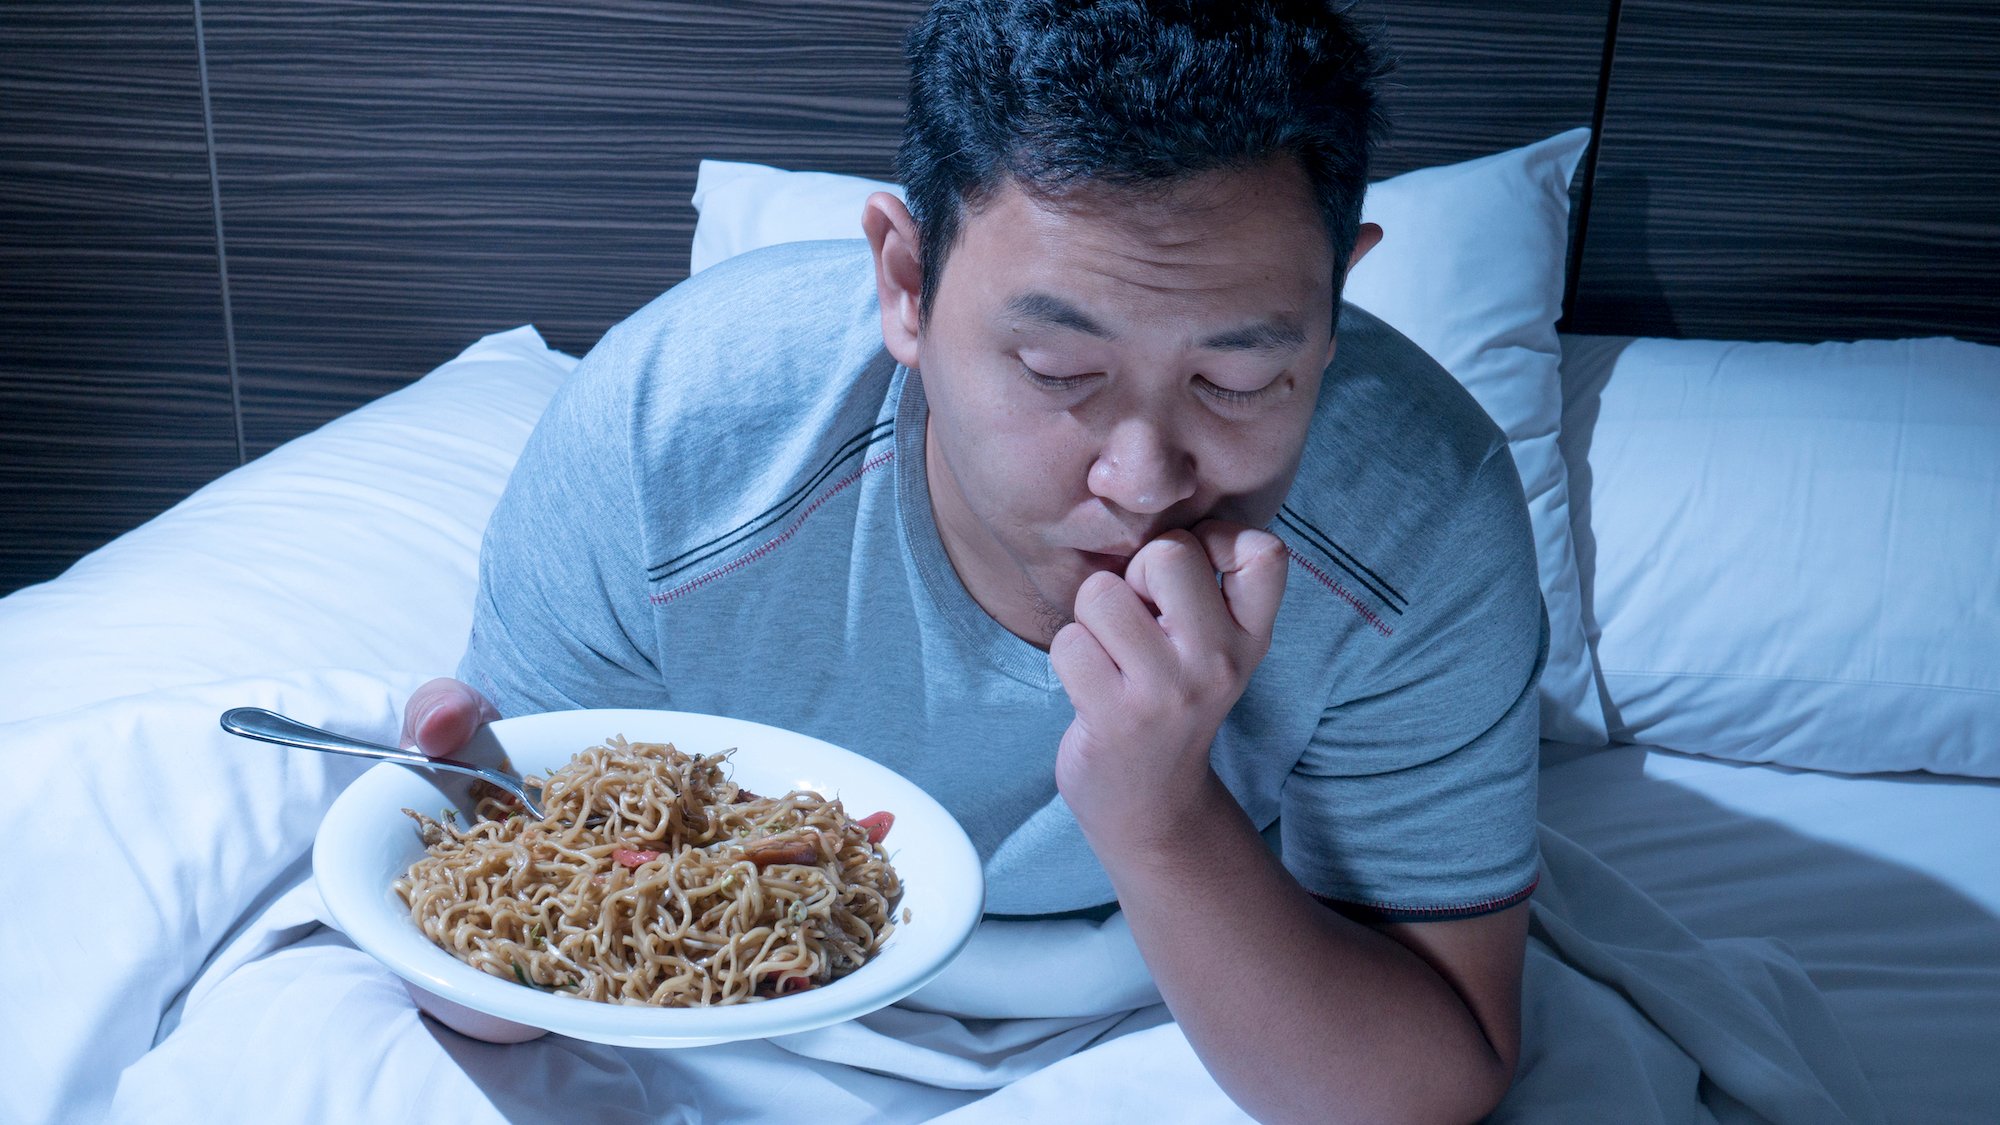 Is It Bad To Eat Before Bed?